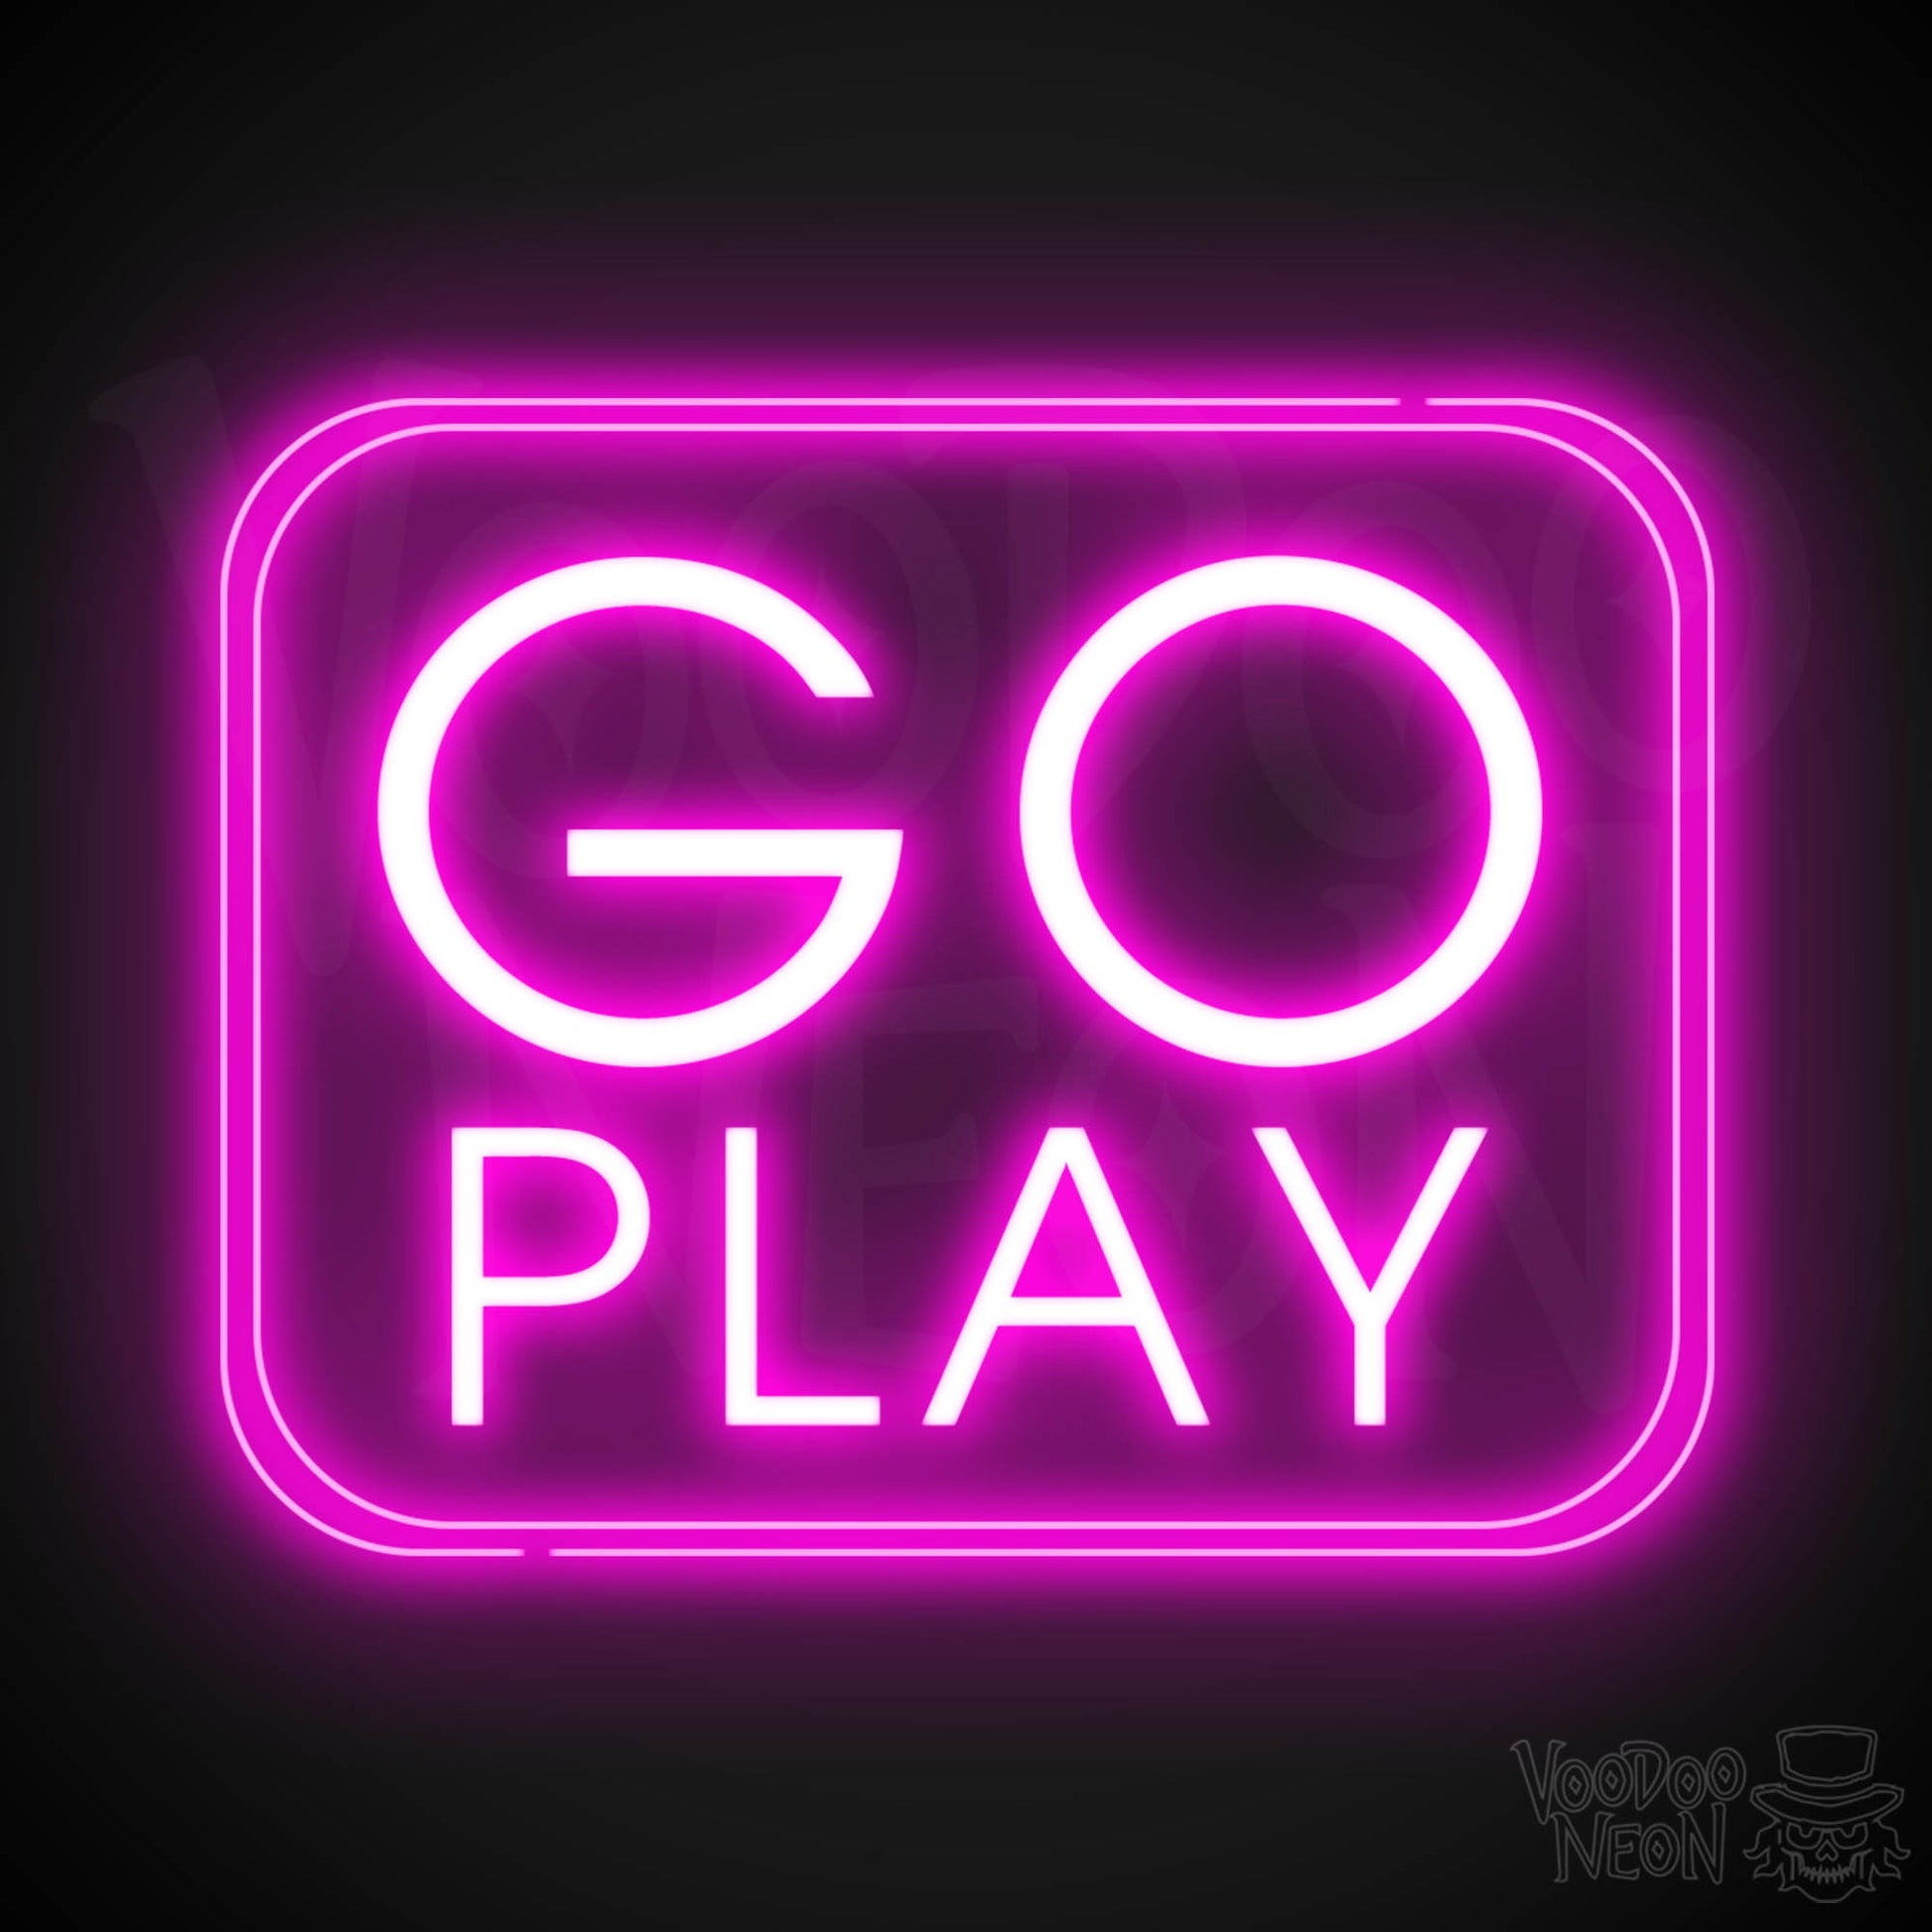 Go Play Neon Sign - Neon Go Play Sign - LED Wall Art - Color Pink